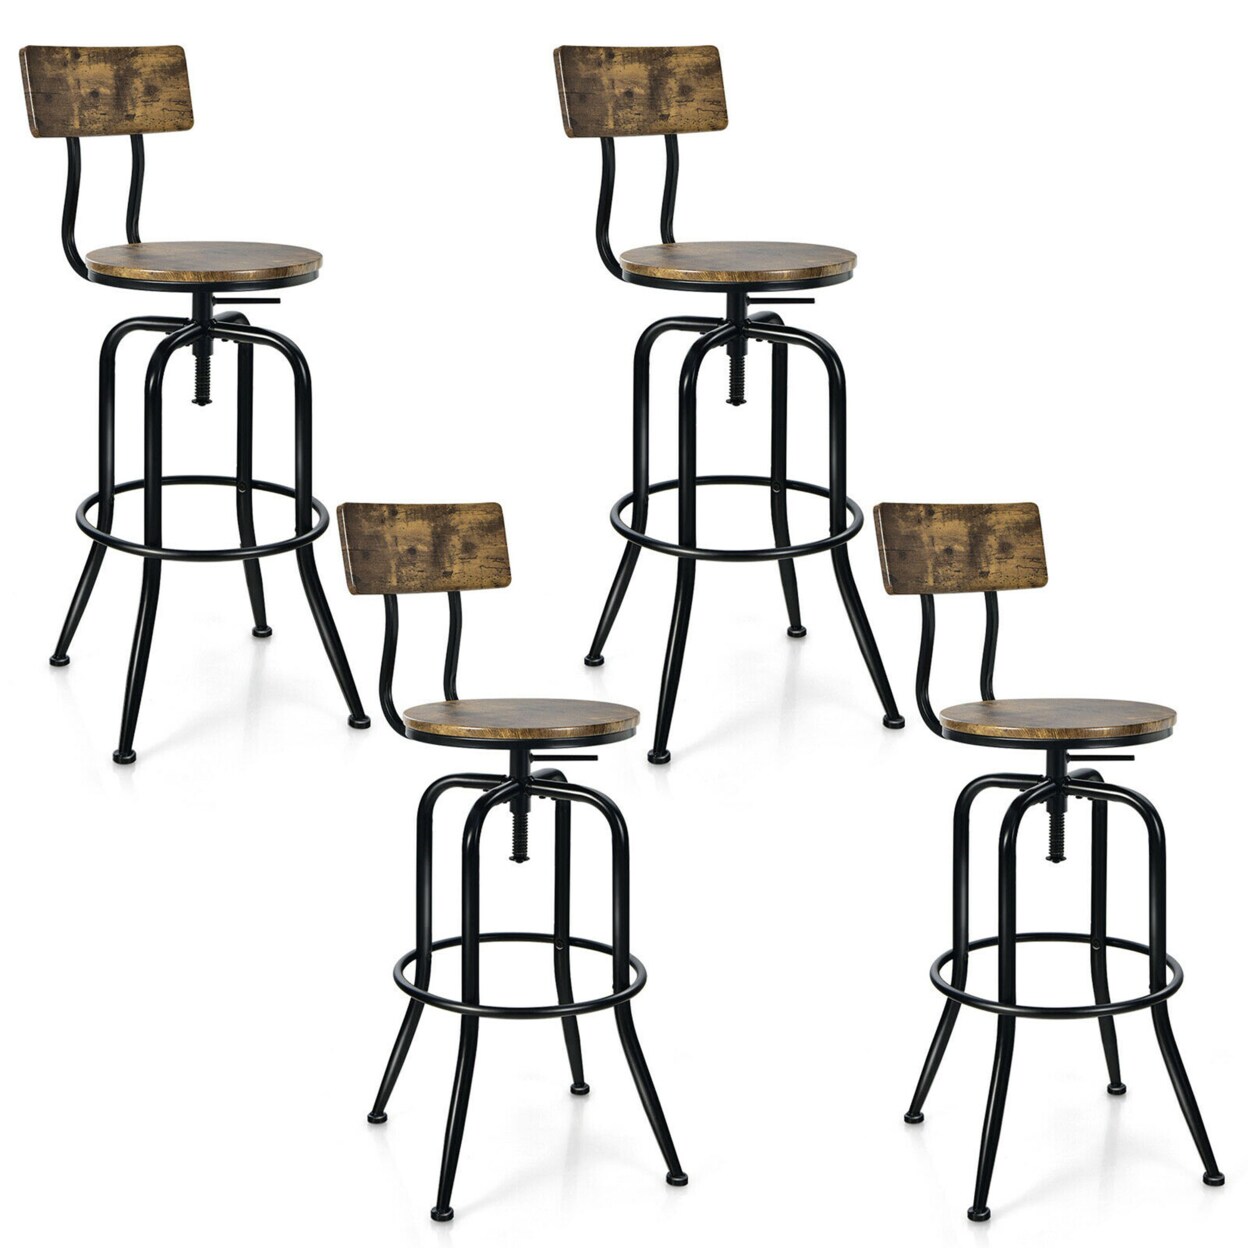 Gymax Set of 4 Industrial Bar Stool Adjustable Swivel Counter-Height Dining Side Chair